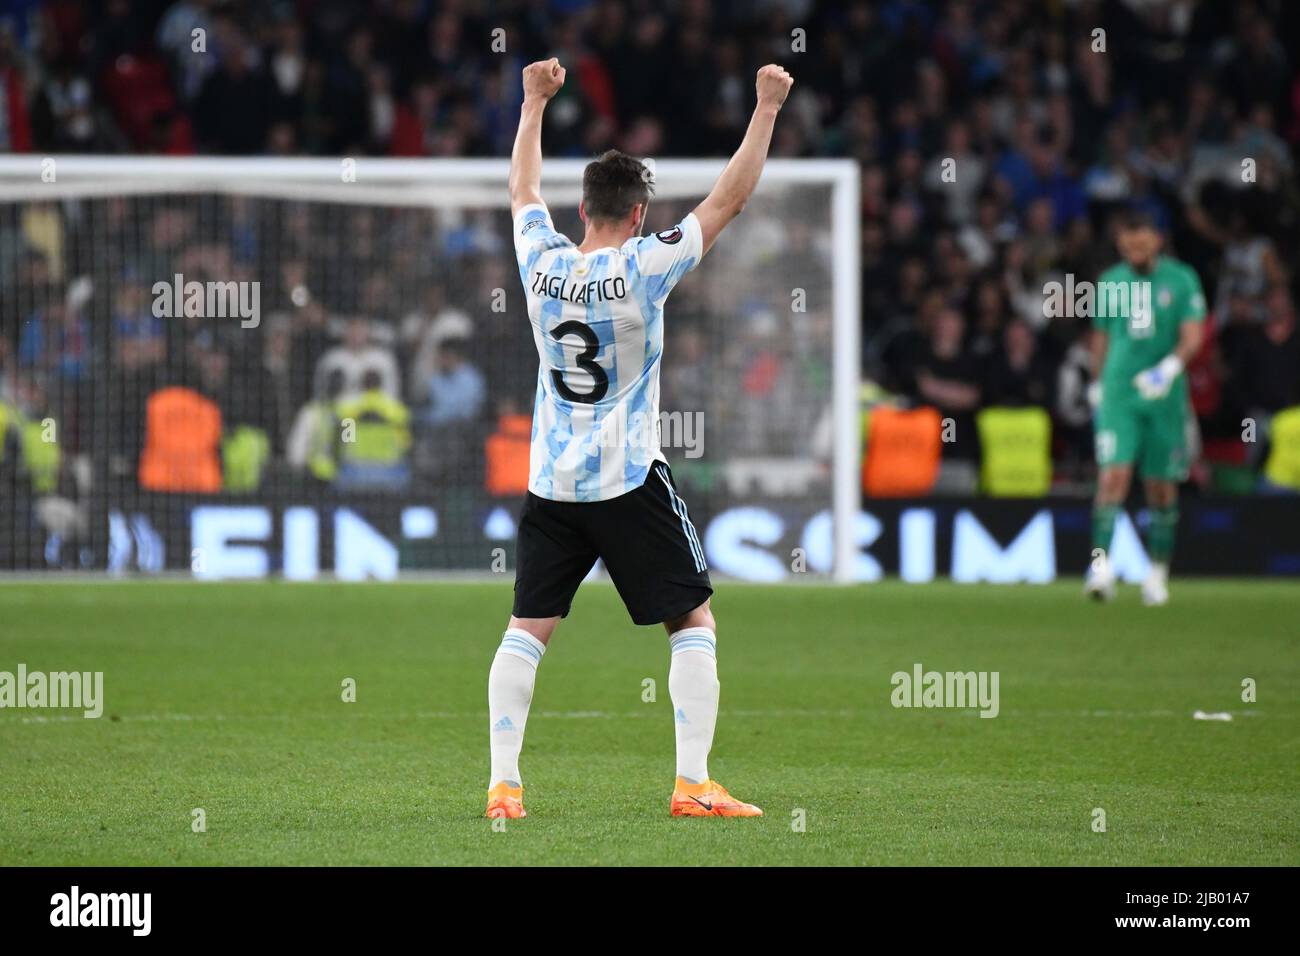 WEMBLEY, ENGLAND - JUNE 1: Tagliafico of Argentina celebrates after Dybala scored a goal during the Finalissima match between Italy and Argentina at Wembley Stadium on June 1, 2022 in Wembley, England. (Photo by Sara Aribó/PxImages) Credit: Px Images/Alamy Live News Stock Photo